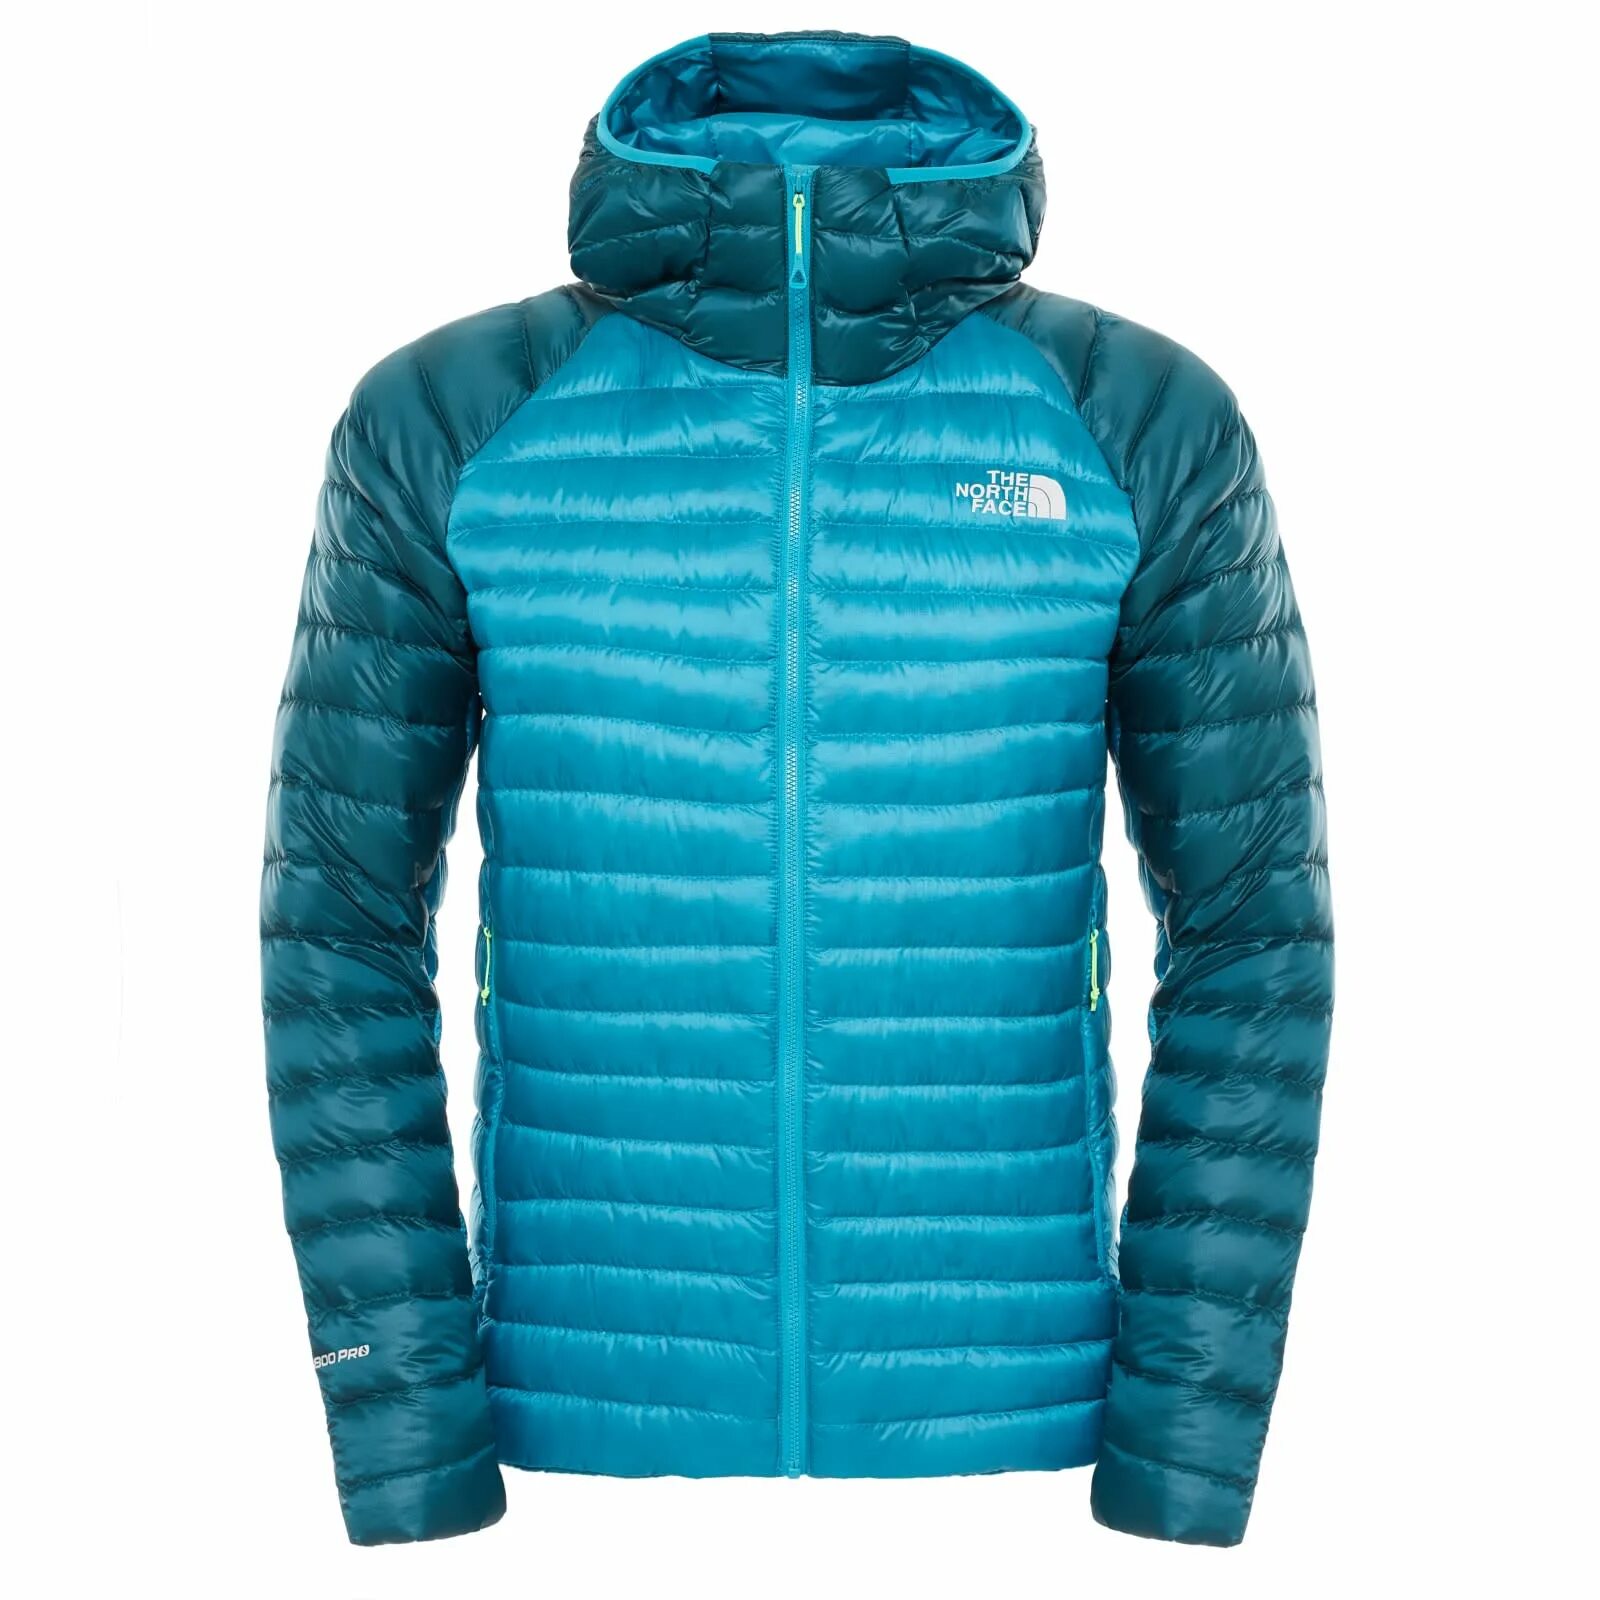 The north face summit series. The North face 800. The North face 800 Pro. TNF 900. The North face Summit Pro down Jacket.